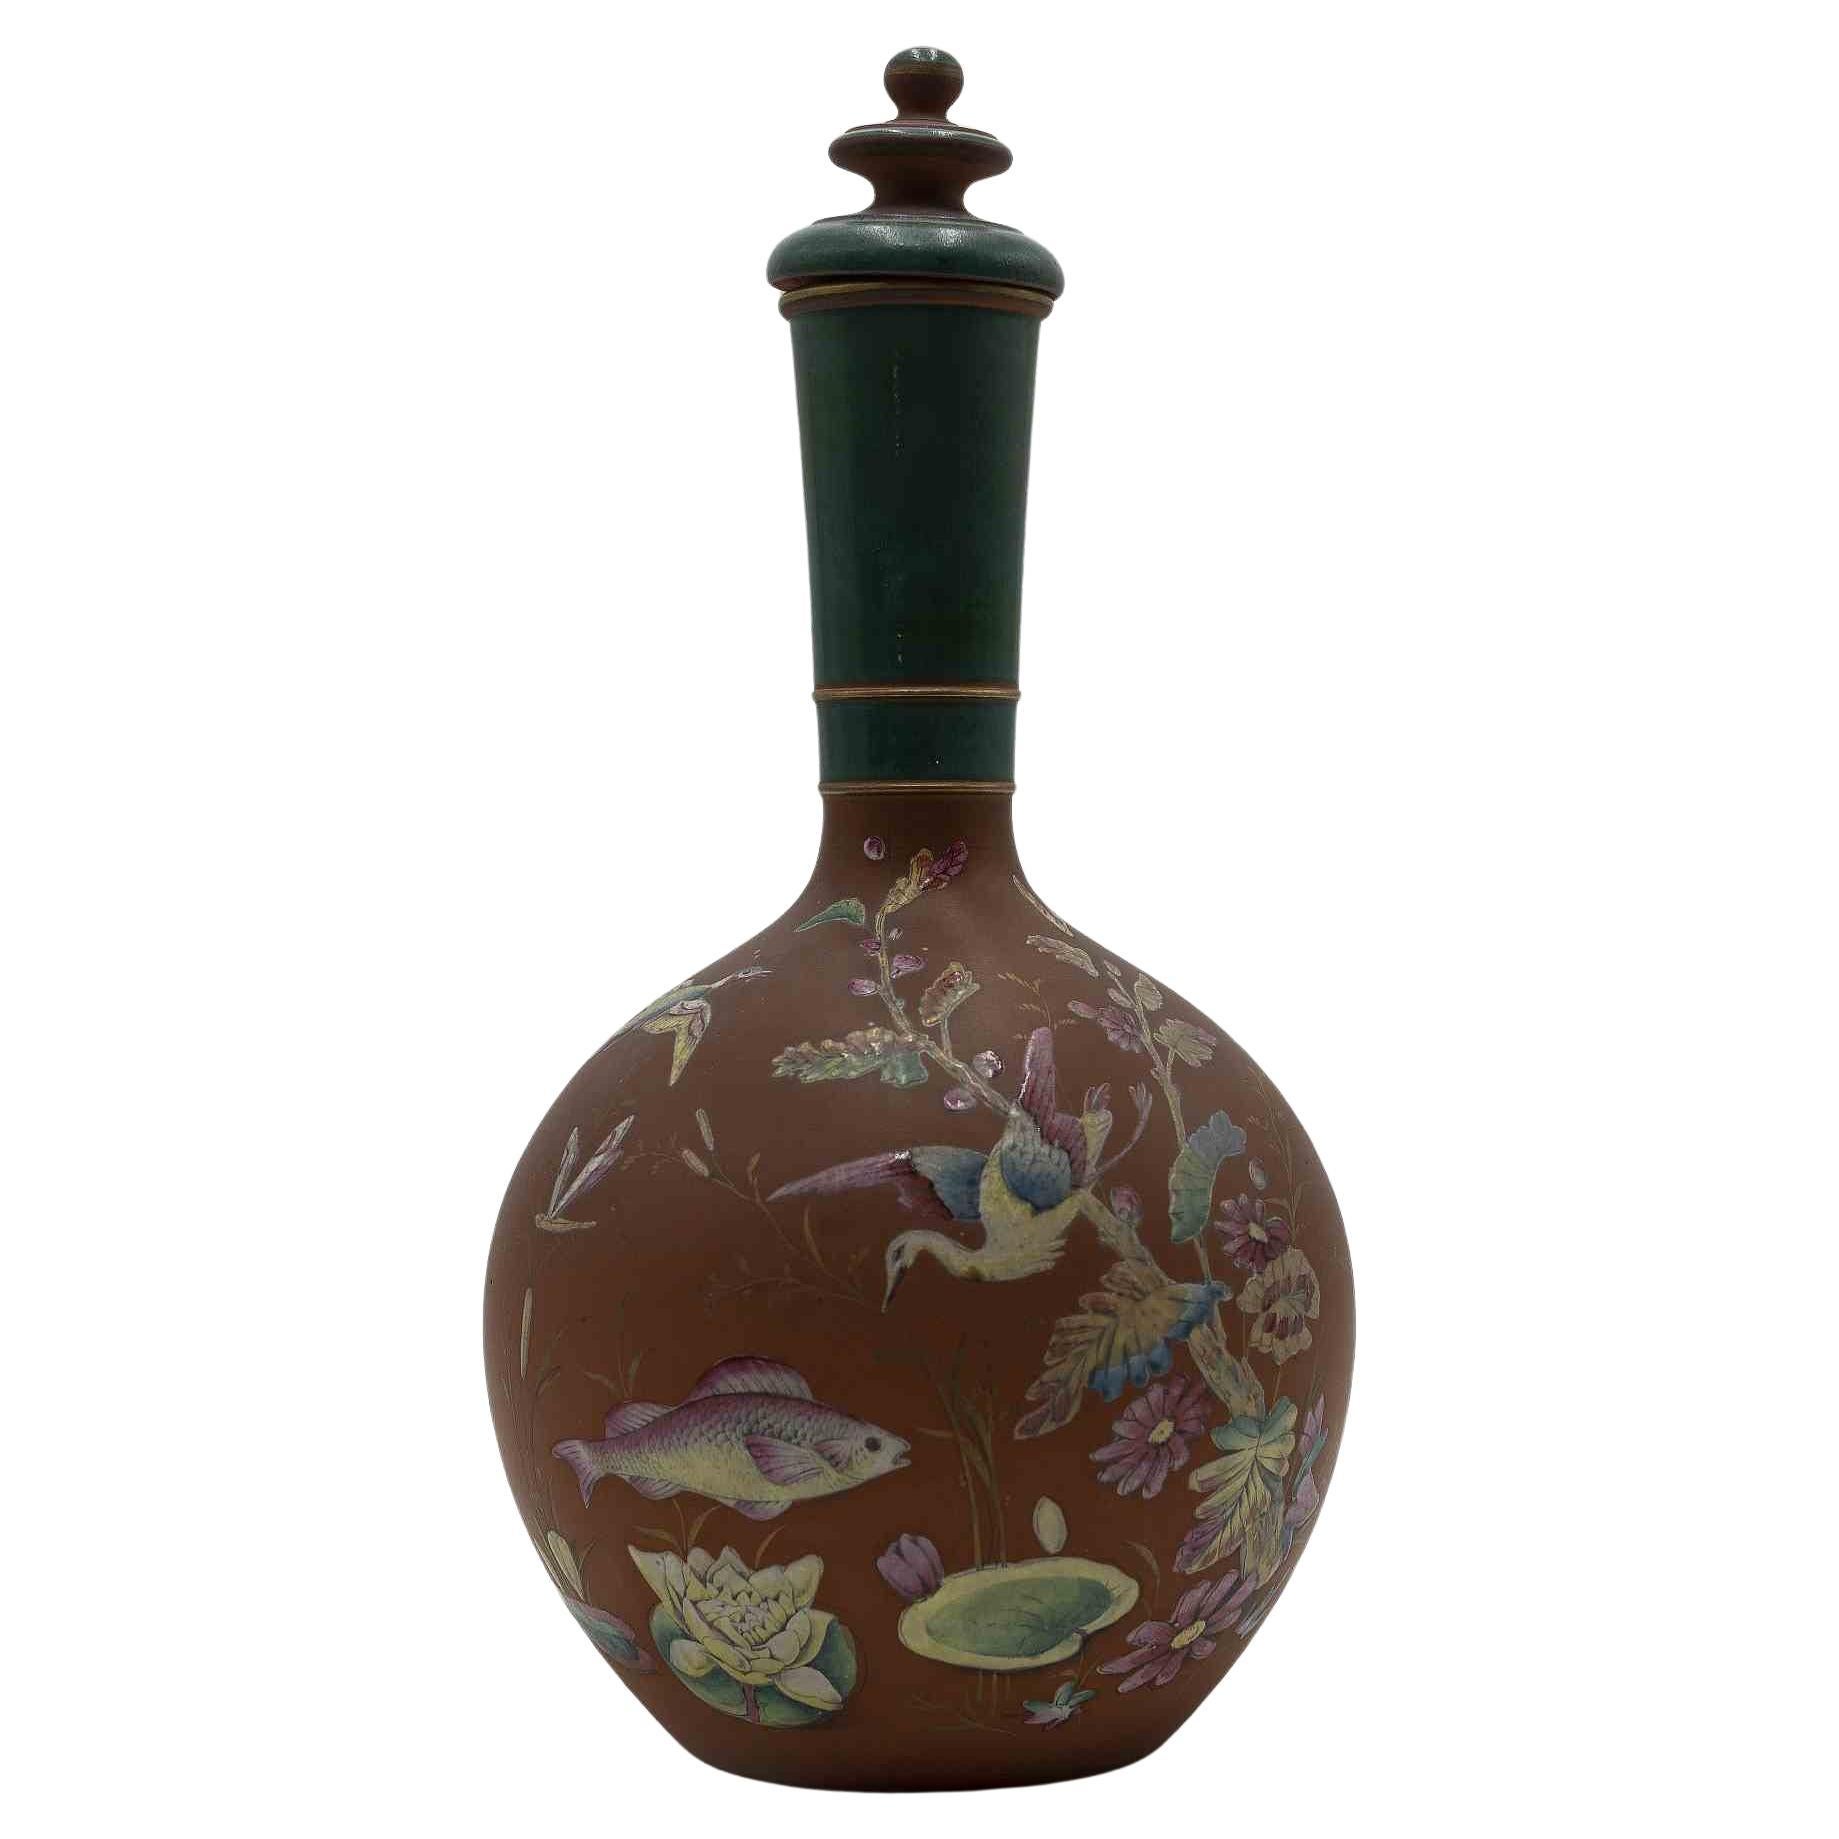 Bottle with Natural Decorations, Early 20th Century